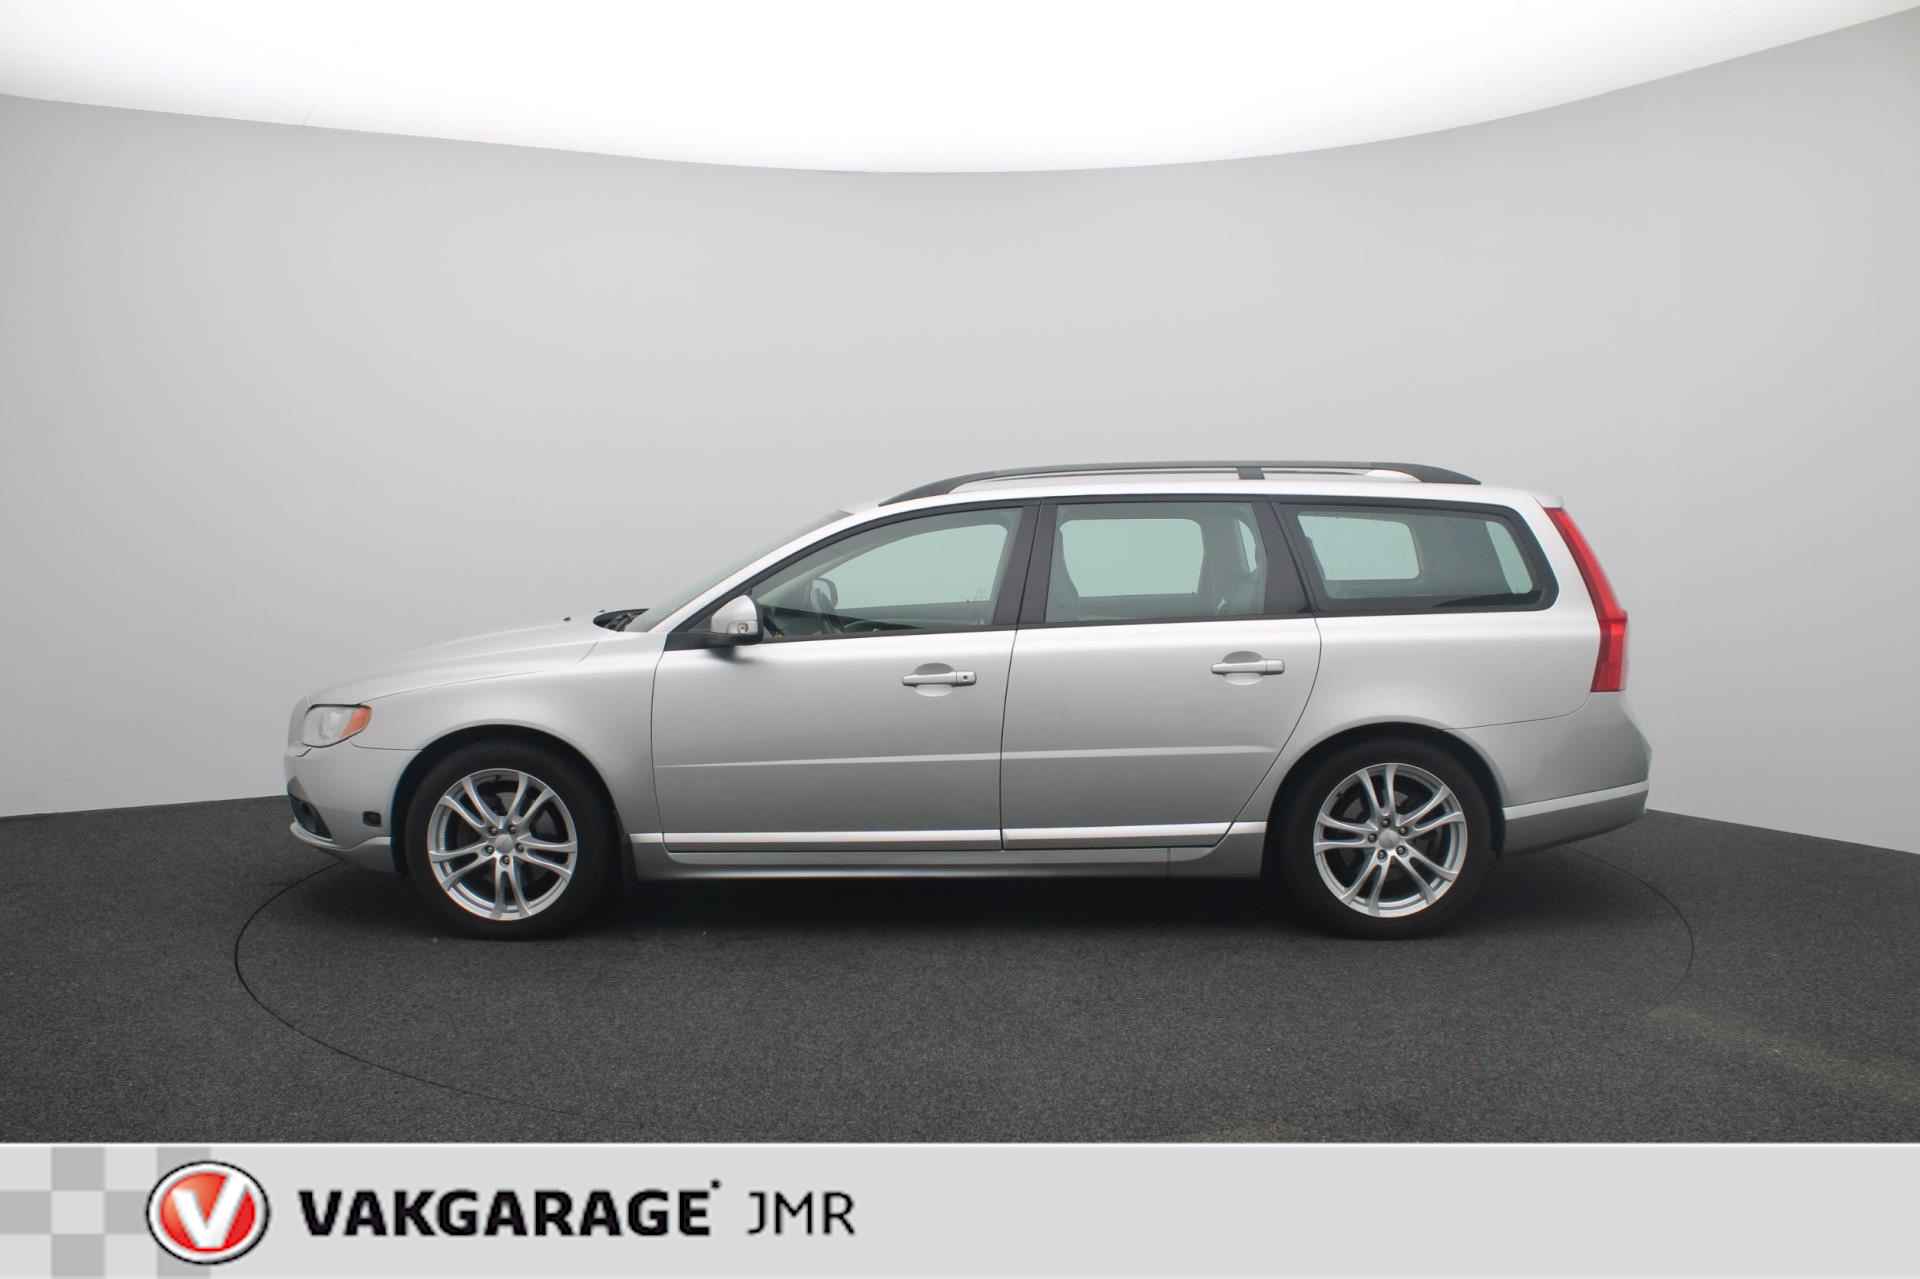 Volvo V70 2.5FT Momentum Youngtimer Trekhaak - PDC Achter - Stoel + Achterbank verwarming - Bluetooth - Climate en Cruise Control - 4/39